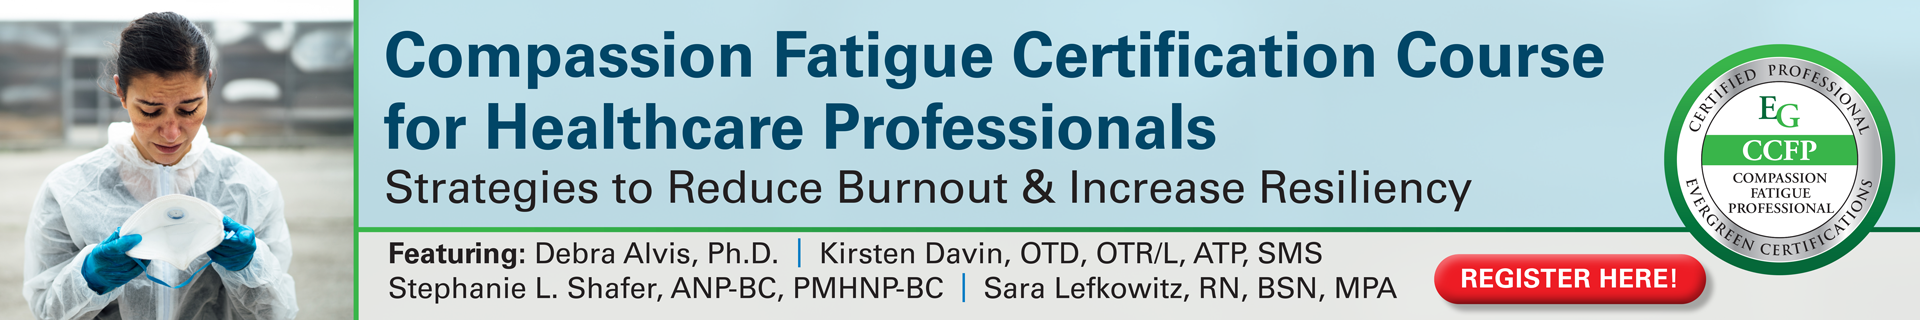 Compassion Fatigue Certification Course for Healthcare Professionals: Strategies to Reduce Burnout & Increase Resiliency